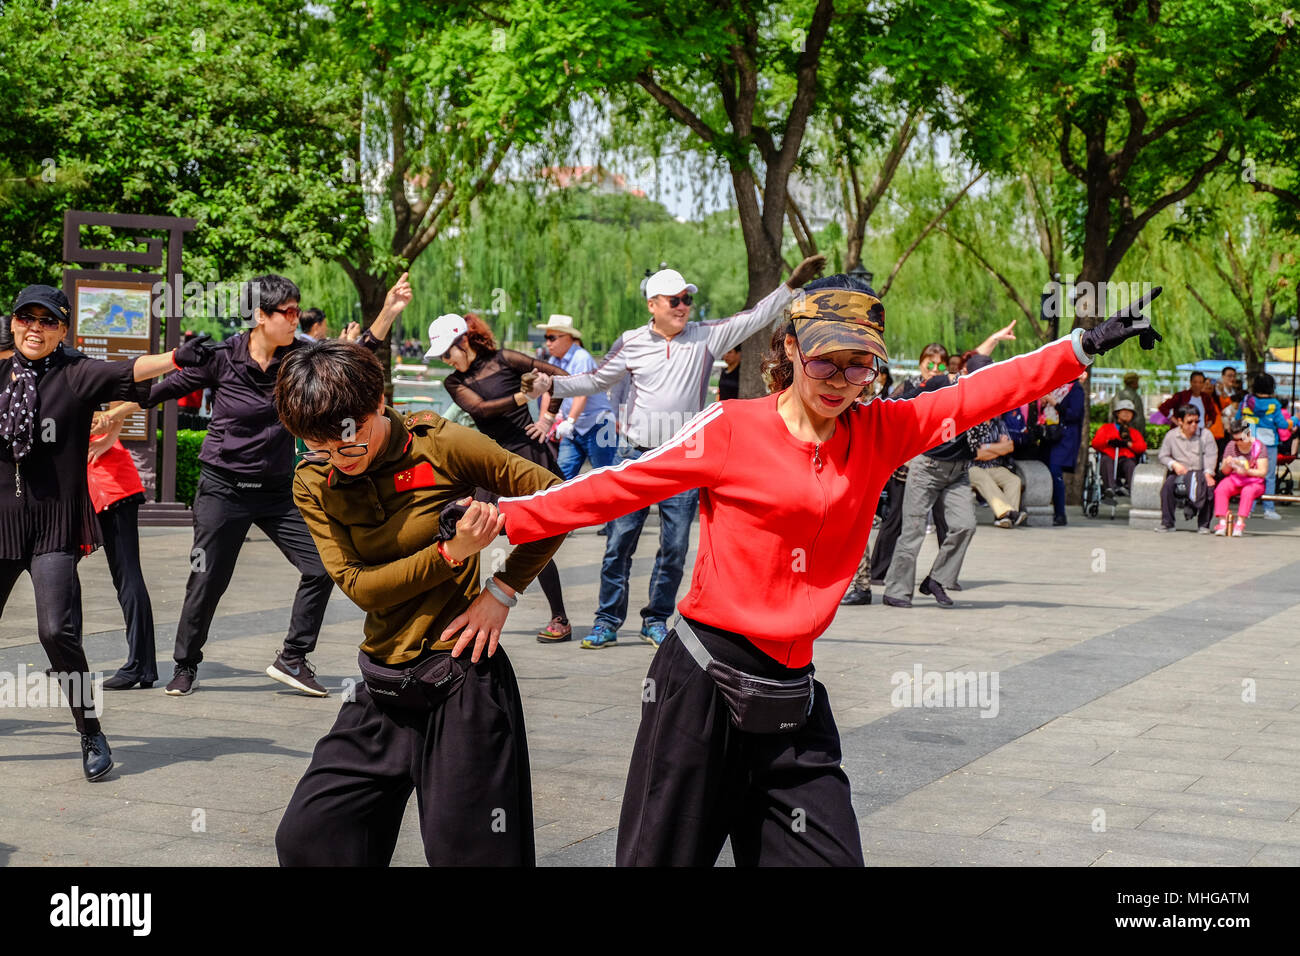 BEIJING, CHINA - APRIL 30, 2018: Dancing people in a park. Taoranting Park is a major city park located in Xicheng District in the southern part of Be Stock Photo